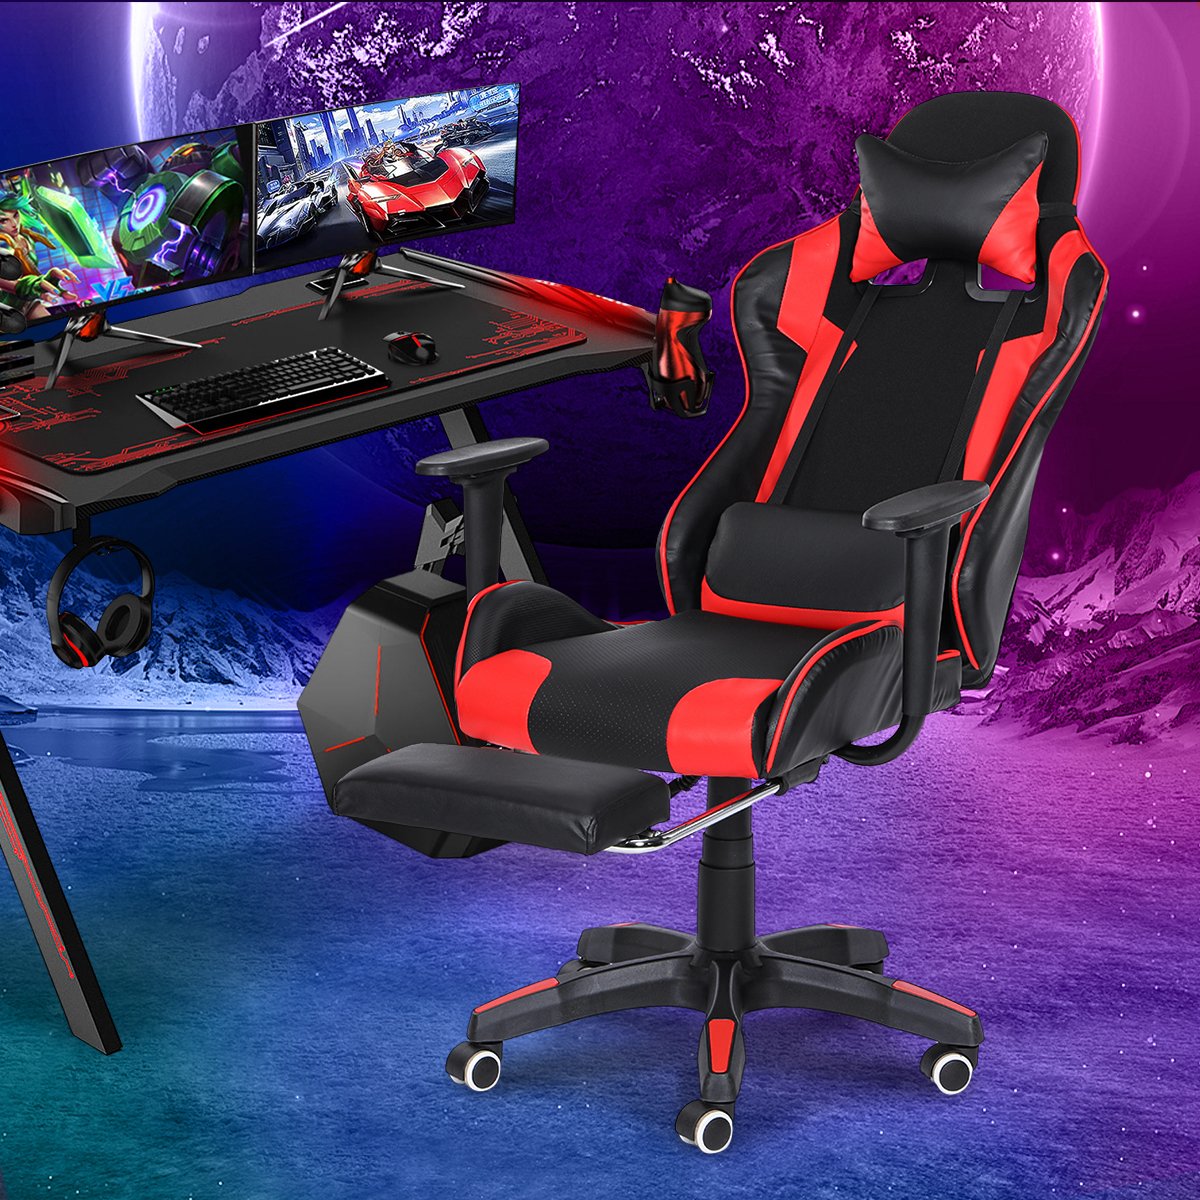 Geepro Massage Gaming Chair Racing Office Chair Computer Game